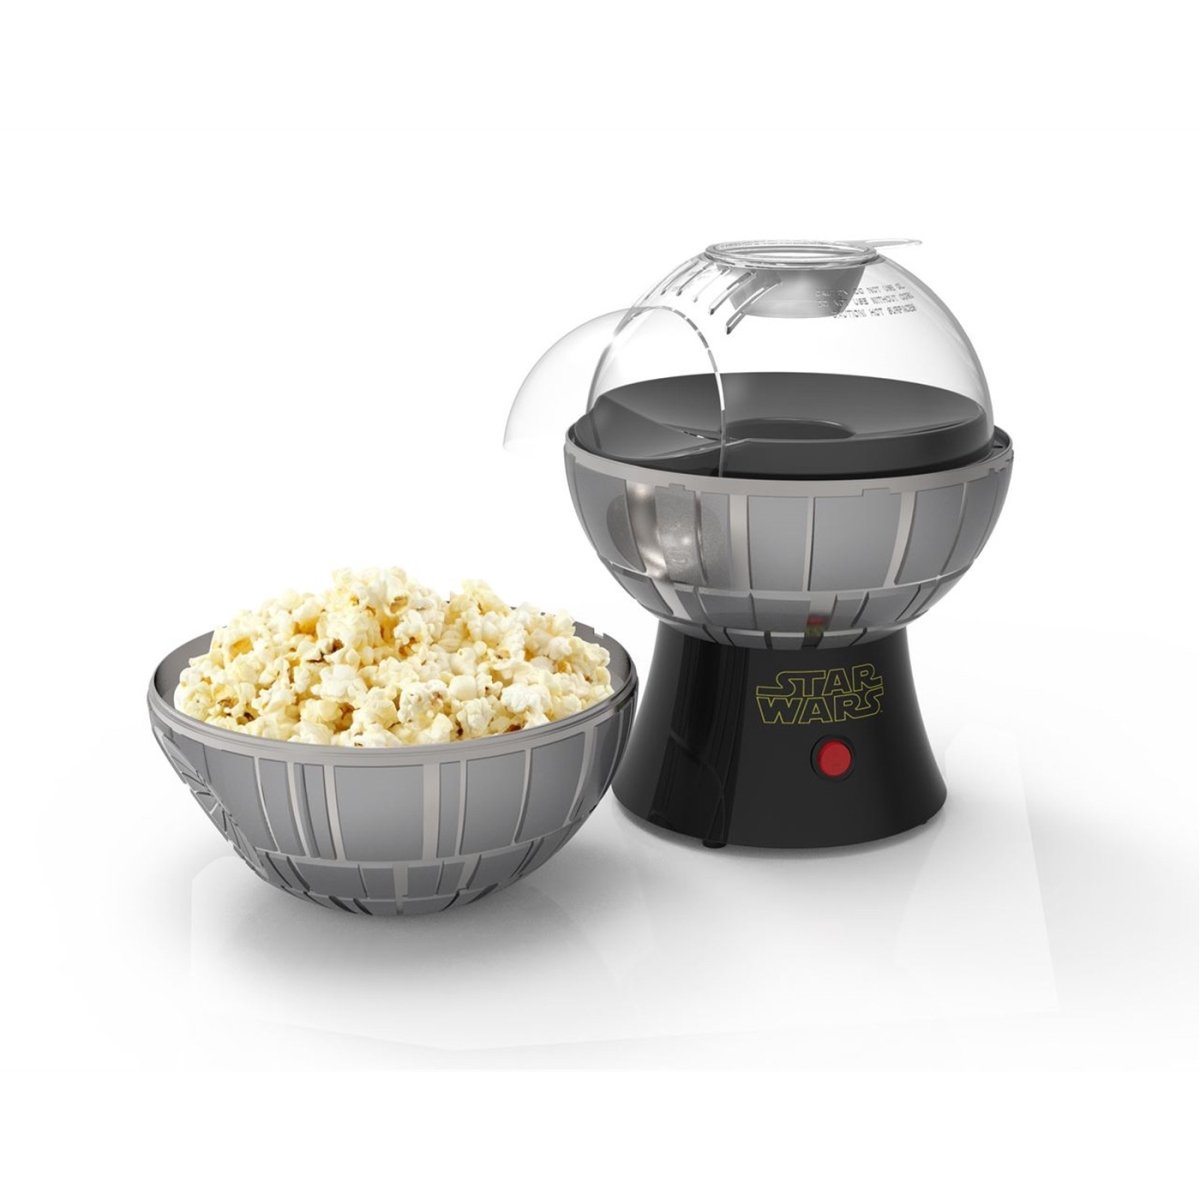 Picture of Star Wars 112783 Death Star Popcorn Maker with Bowl